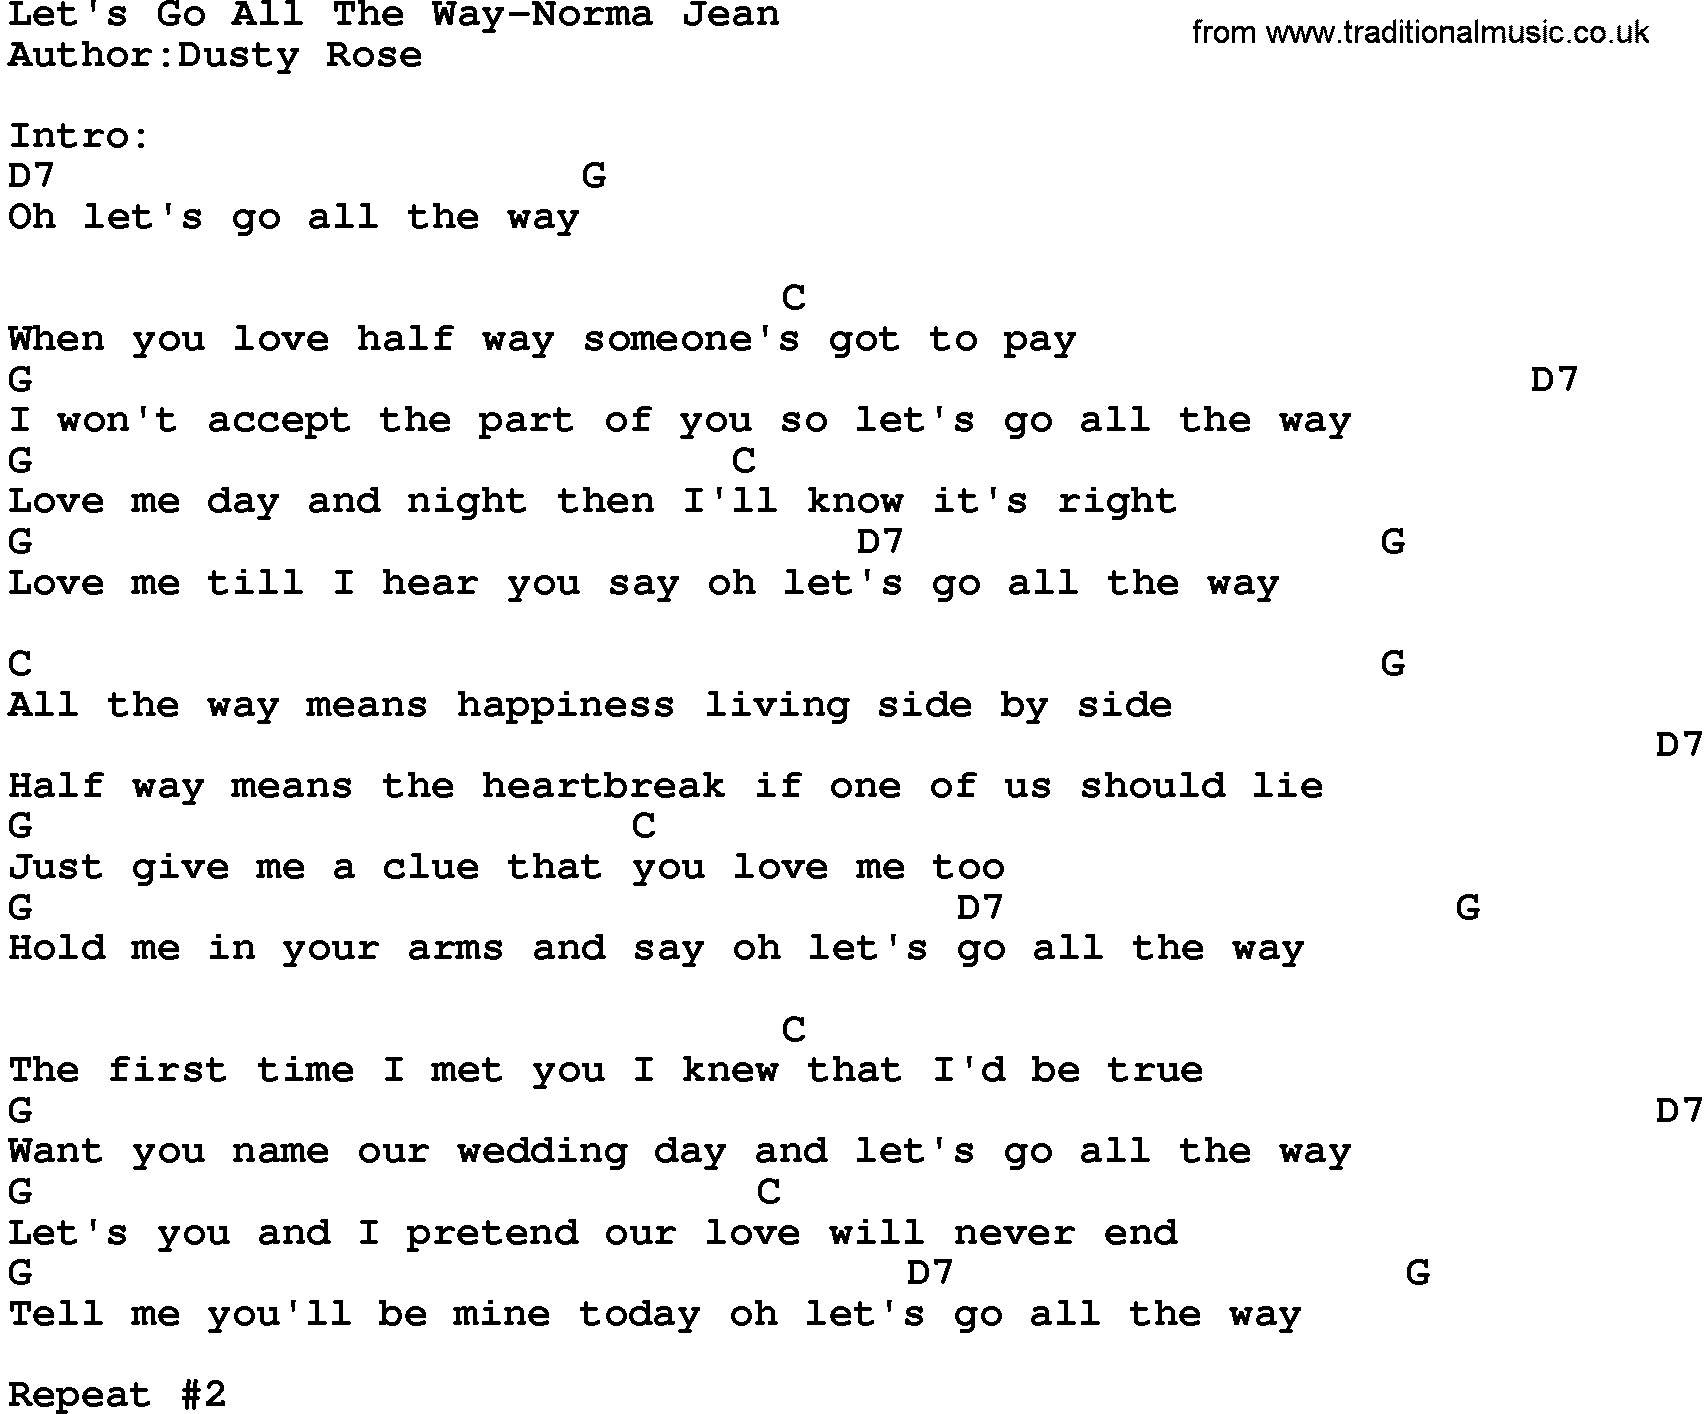 Country music song: Let's Go All The Way-Norma Jean lyrics and chords